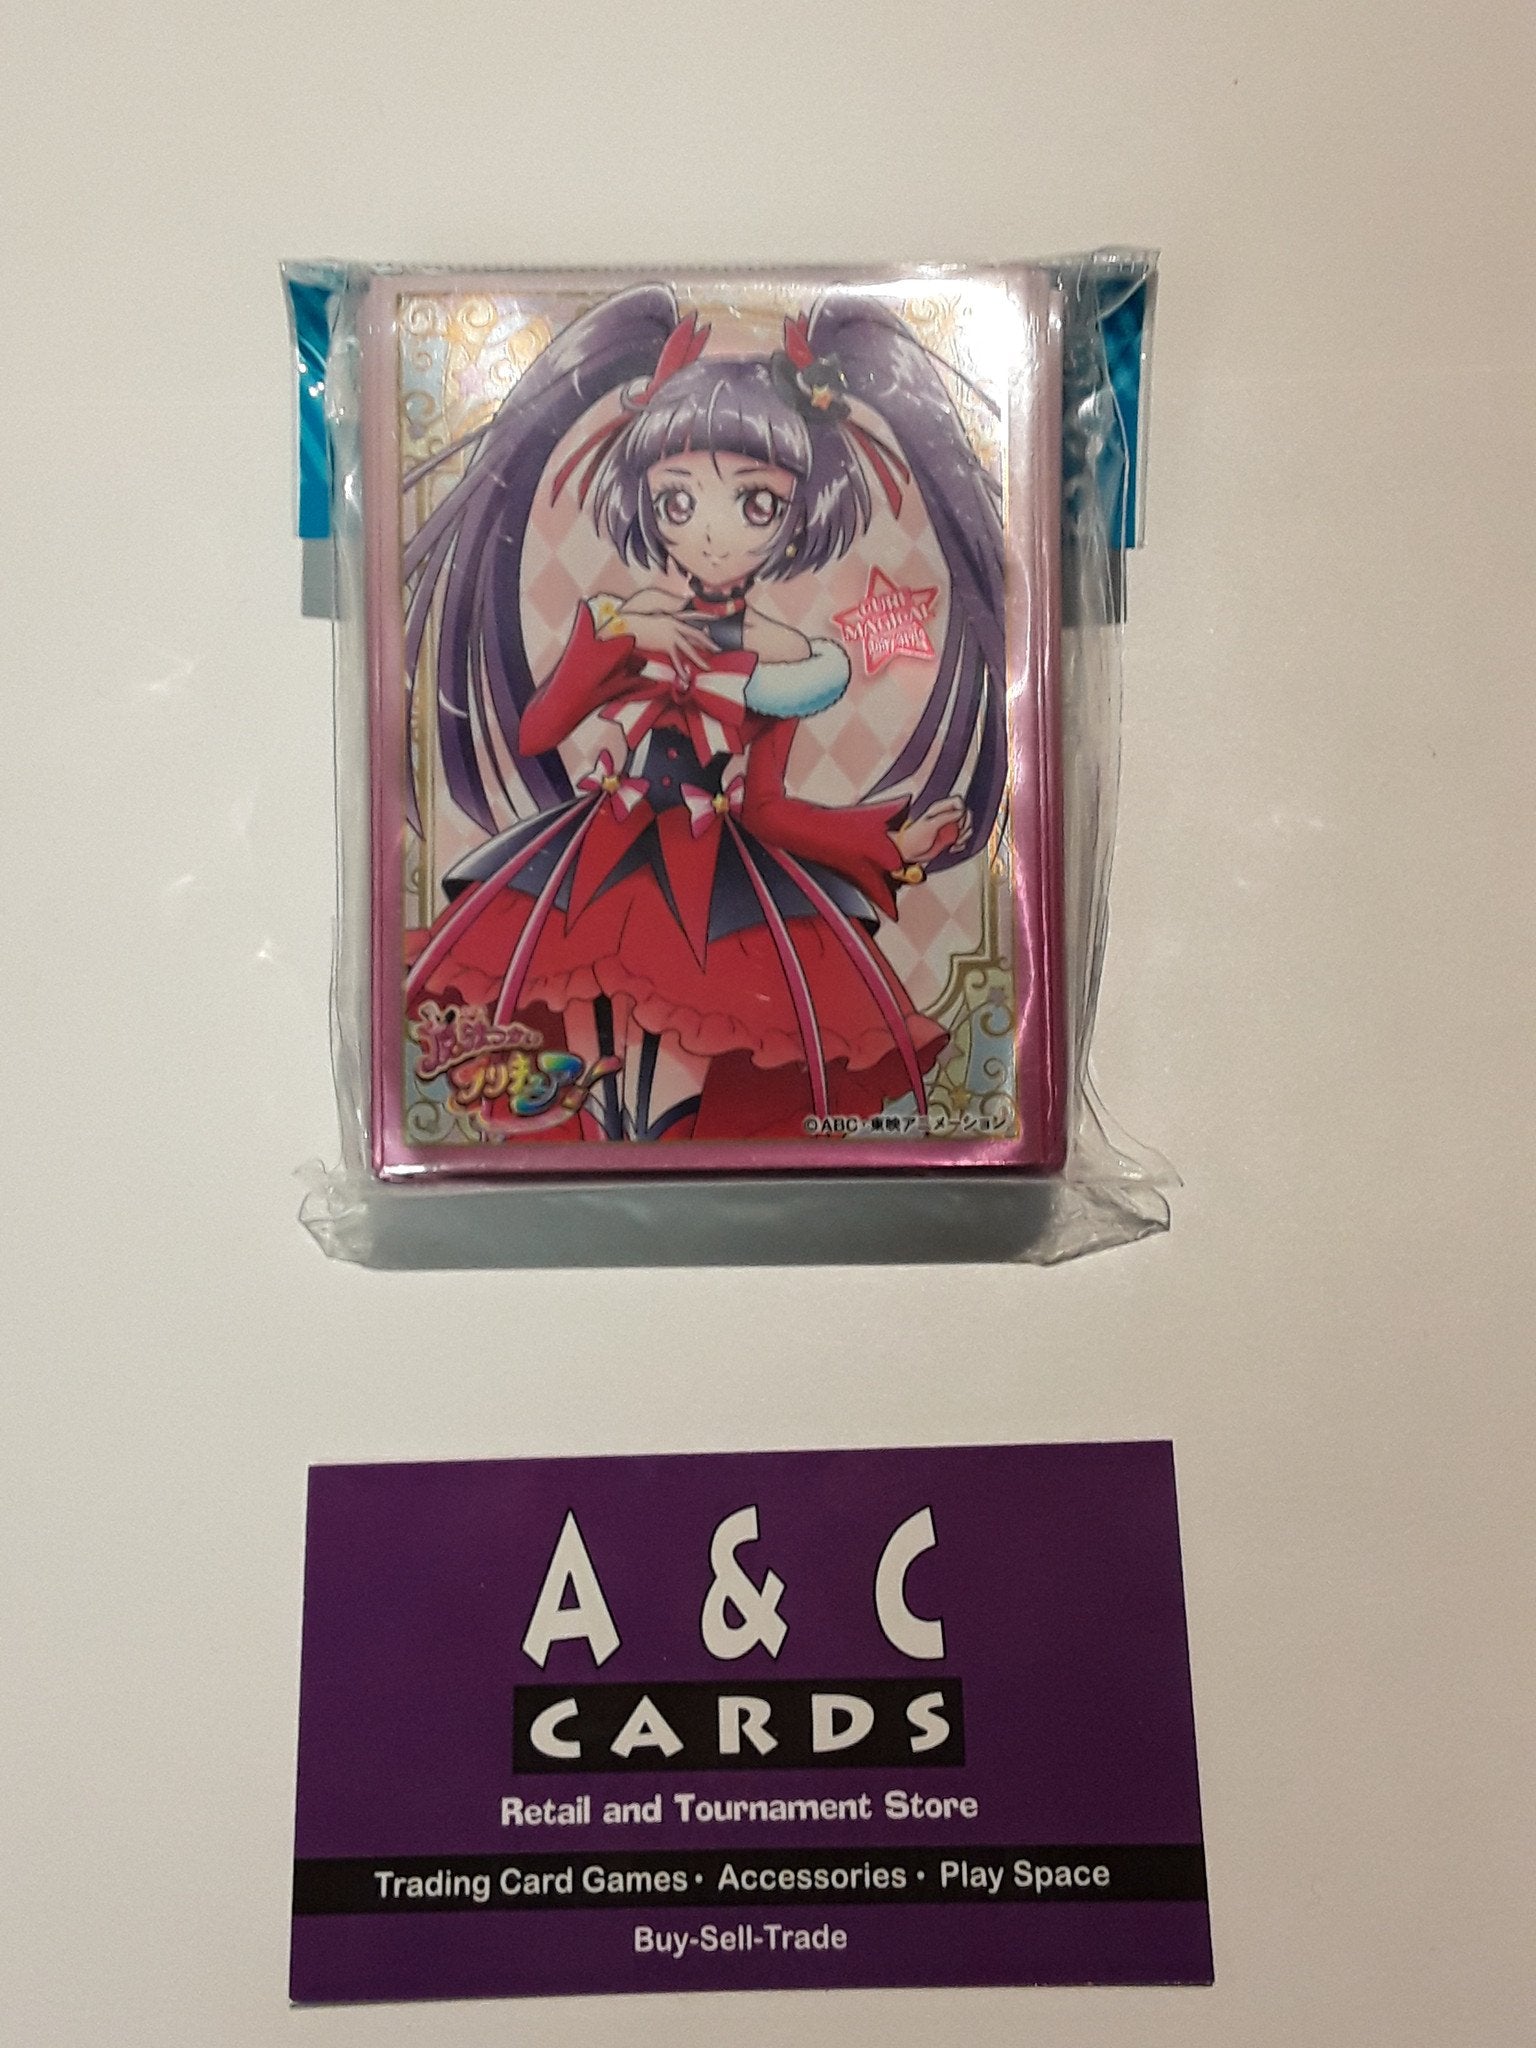 Character Sleeves "Magic Girls Precure" #4 - 1 pack of Standard Size Sleeves 65pc. - Magic Girls Precure